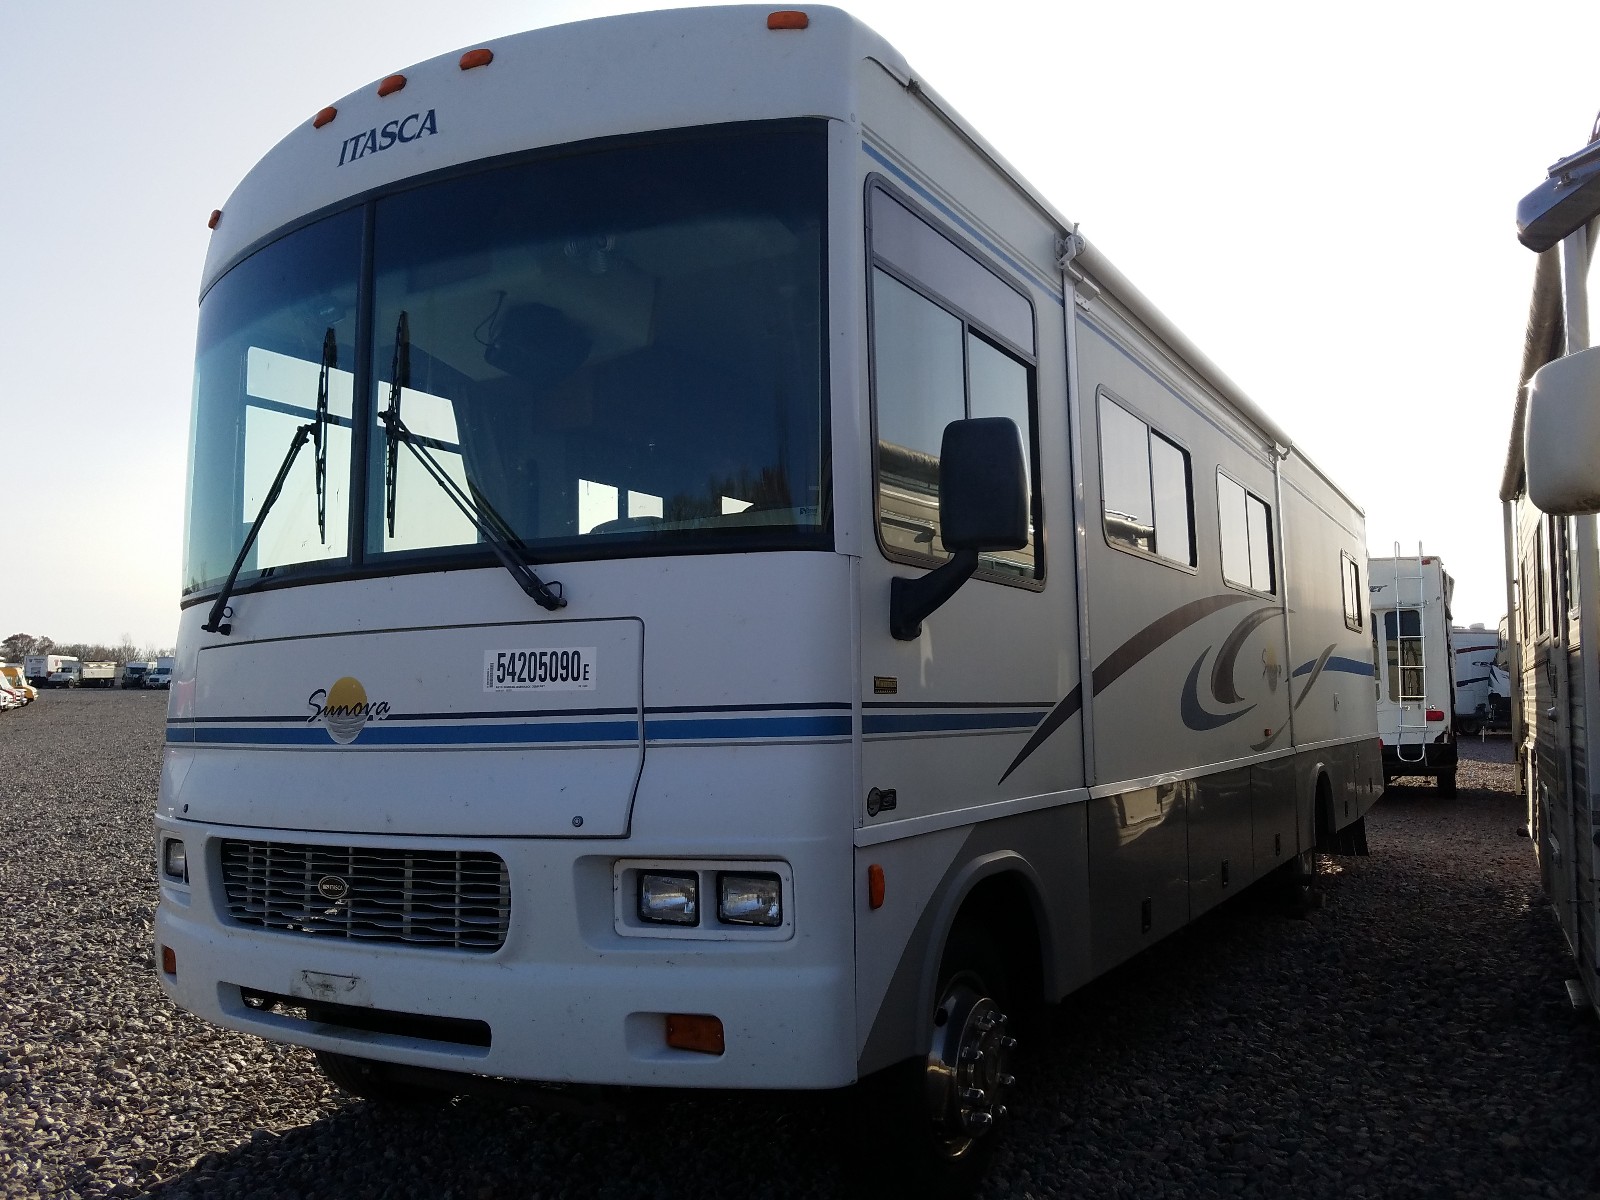 2003 WORKHORSE CUSTOM CHASSIS MOTORHOME CHASSIS W22 for Sale | MN - ST. CLOUD | Mon. Nov 30 2003 Workhorse Custom Chassis Motorhome Chassis W22